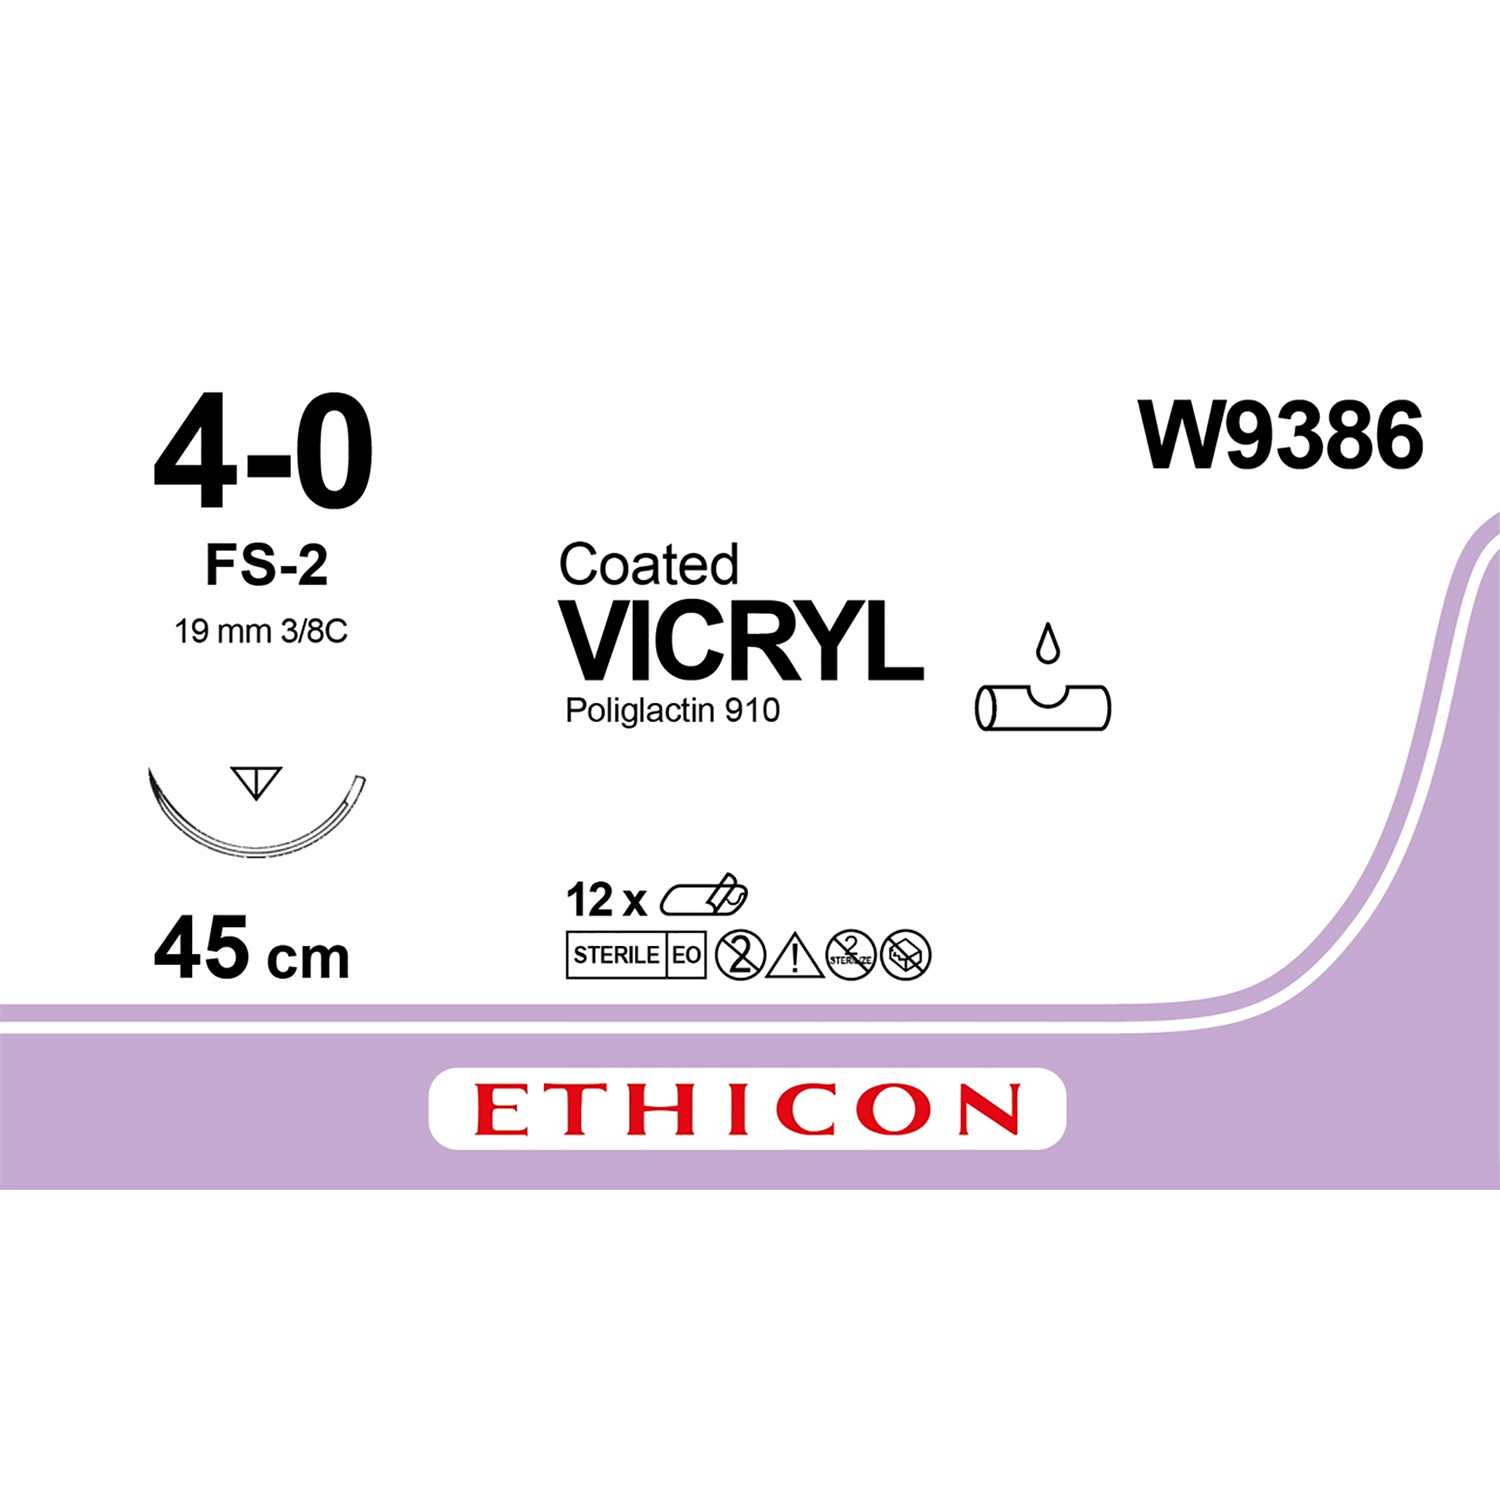 Ethicon Coated Vicryl Suture | Absorbable | Violet | Length: 45cm | Size 4-0 | Needle: FS-2 | Pack of 12